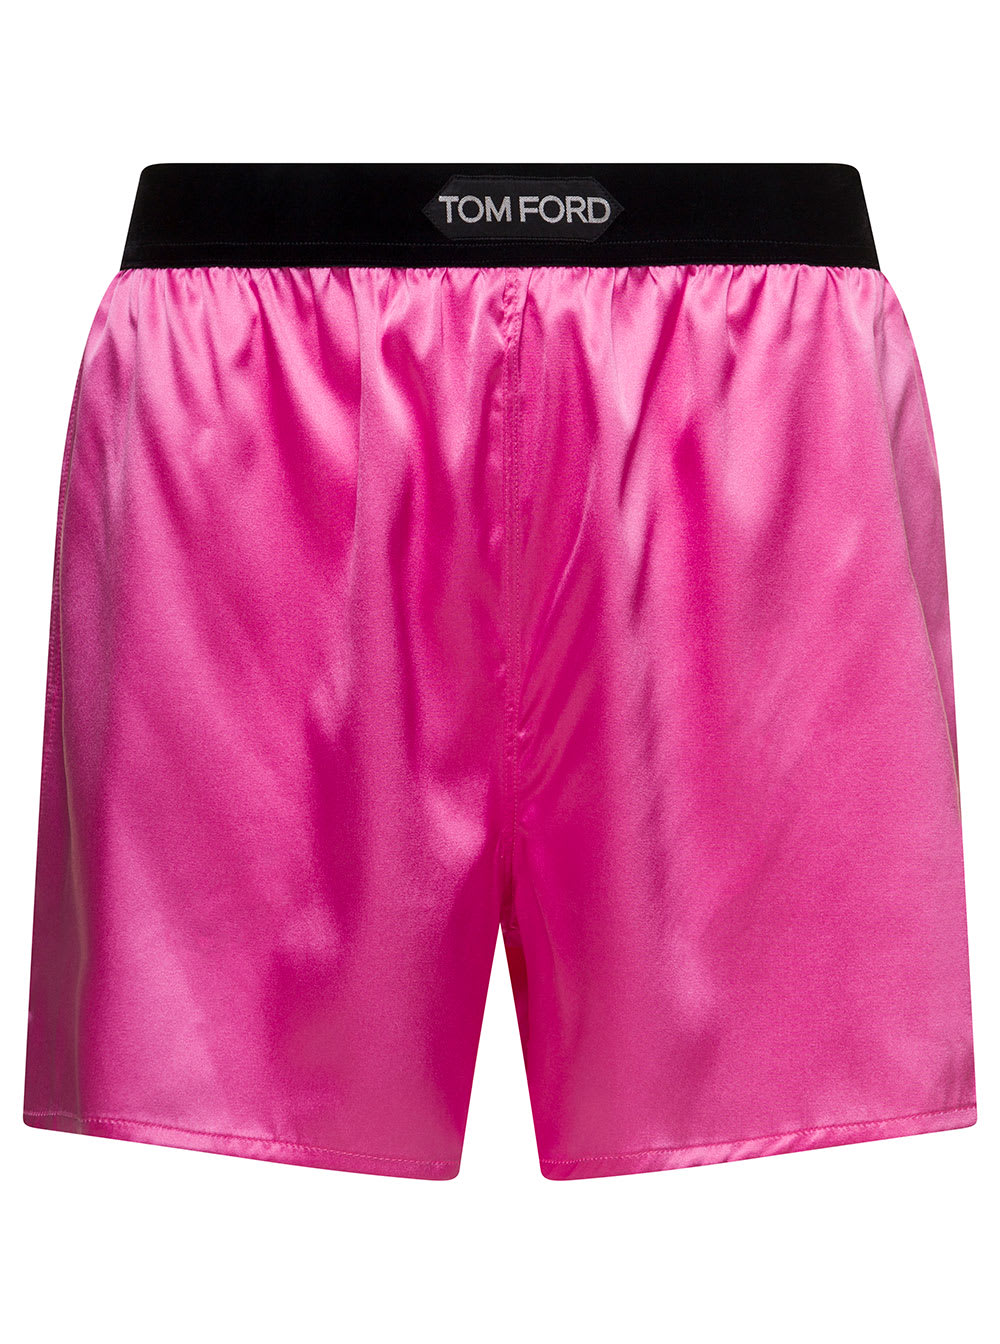 Tom Ford Pink Satin Shirts With Logo On Waistband In Stretch Silk Woman |  italist, ALWAYS LIKE A SALE